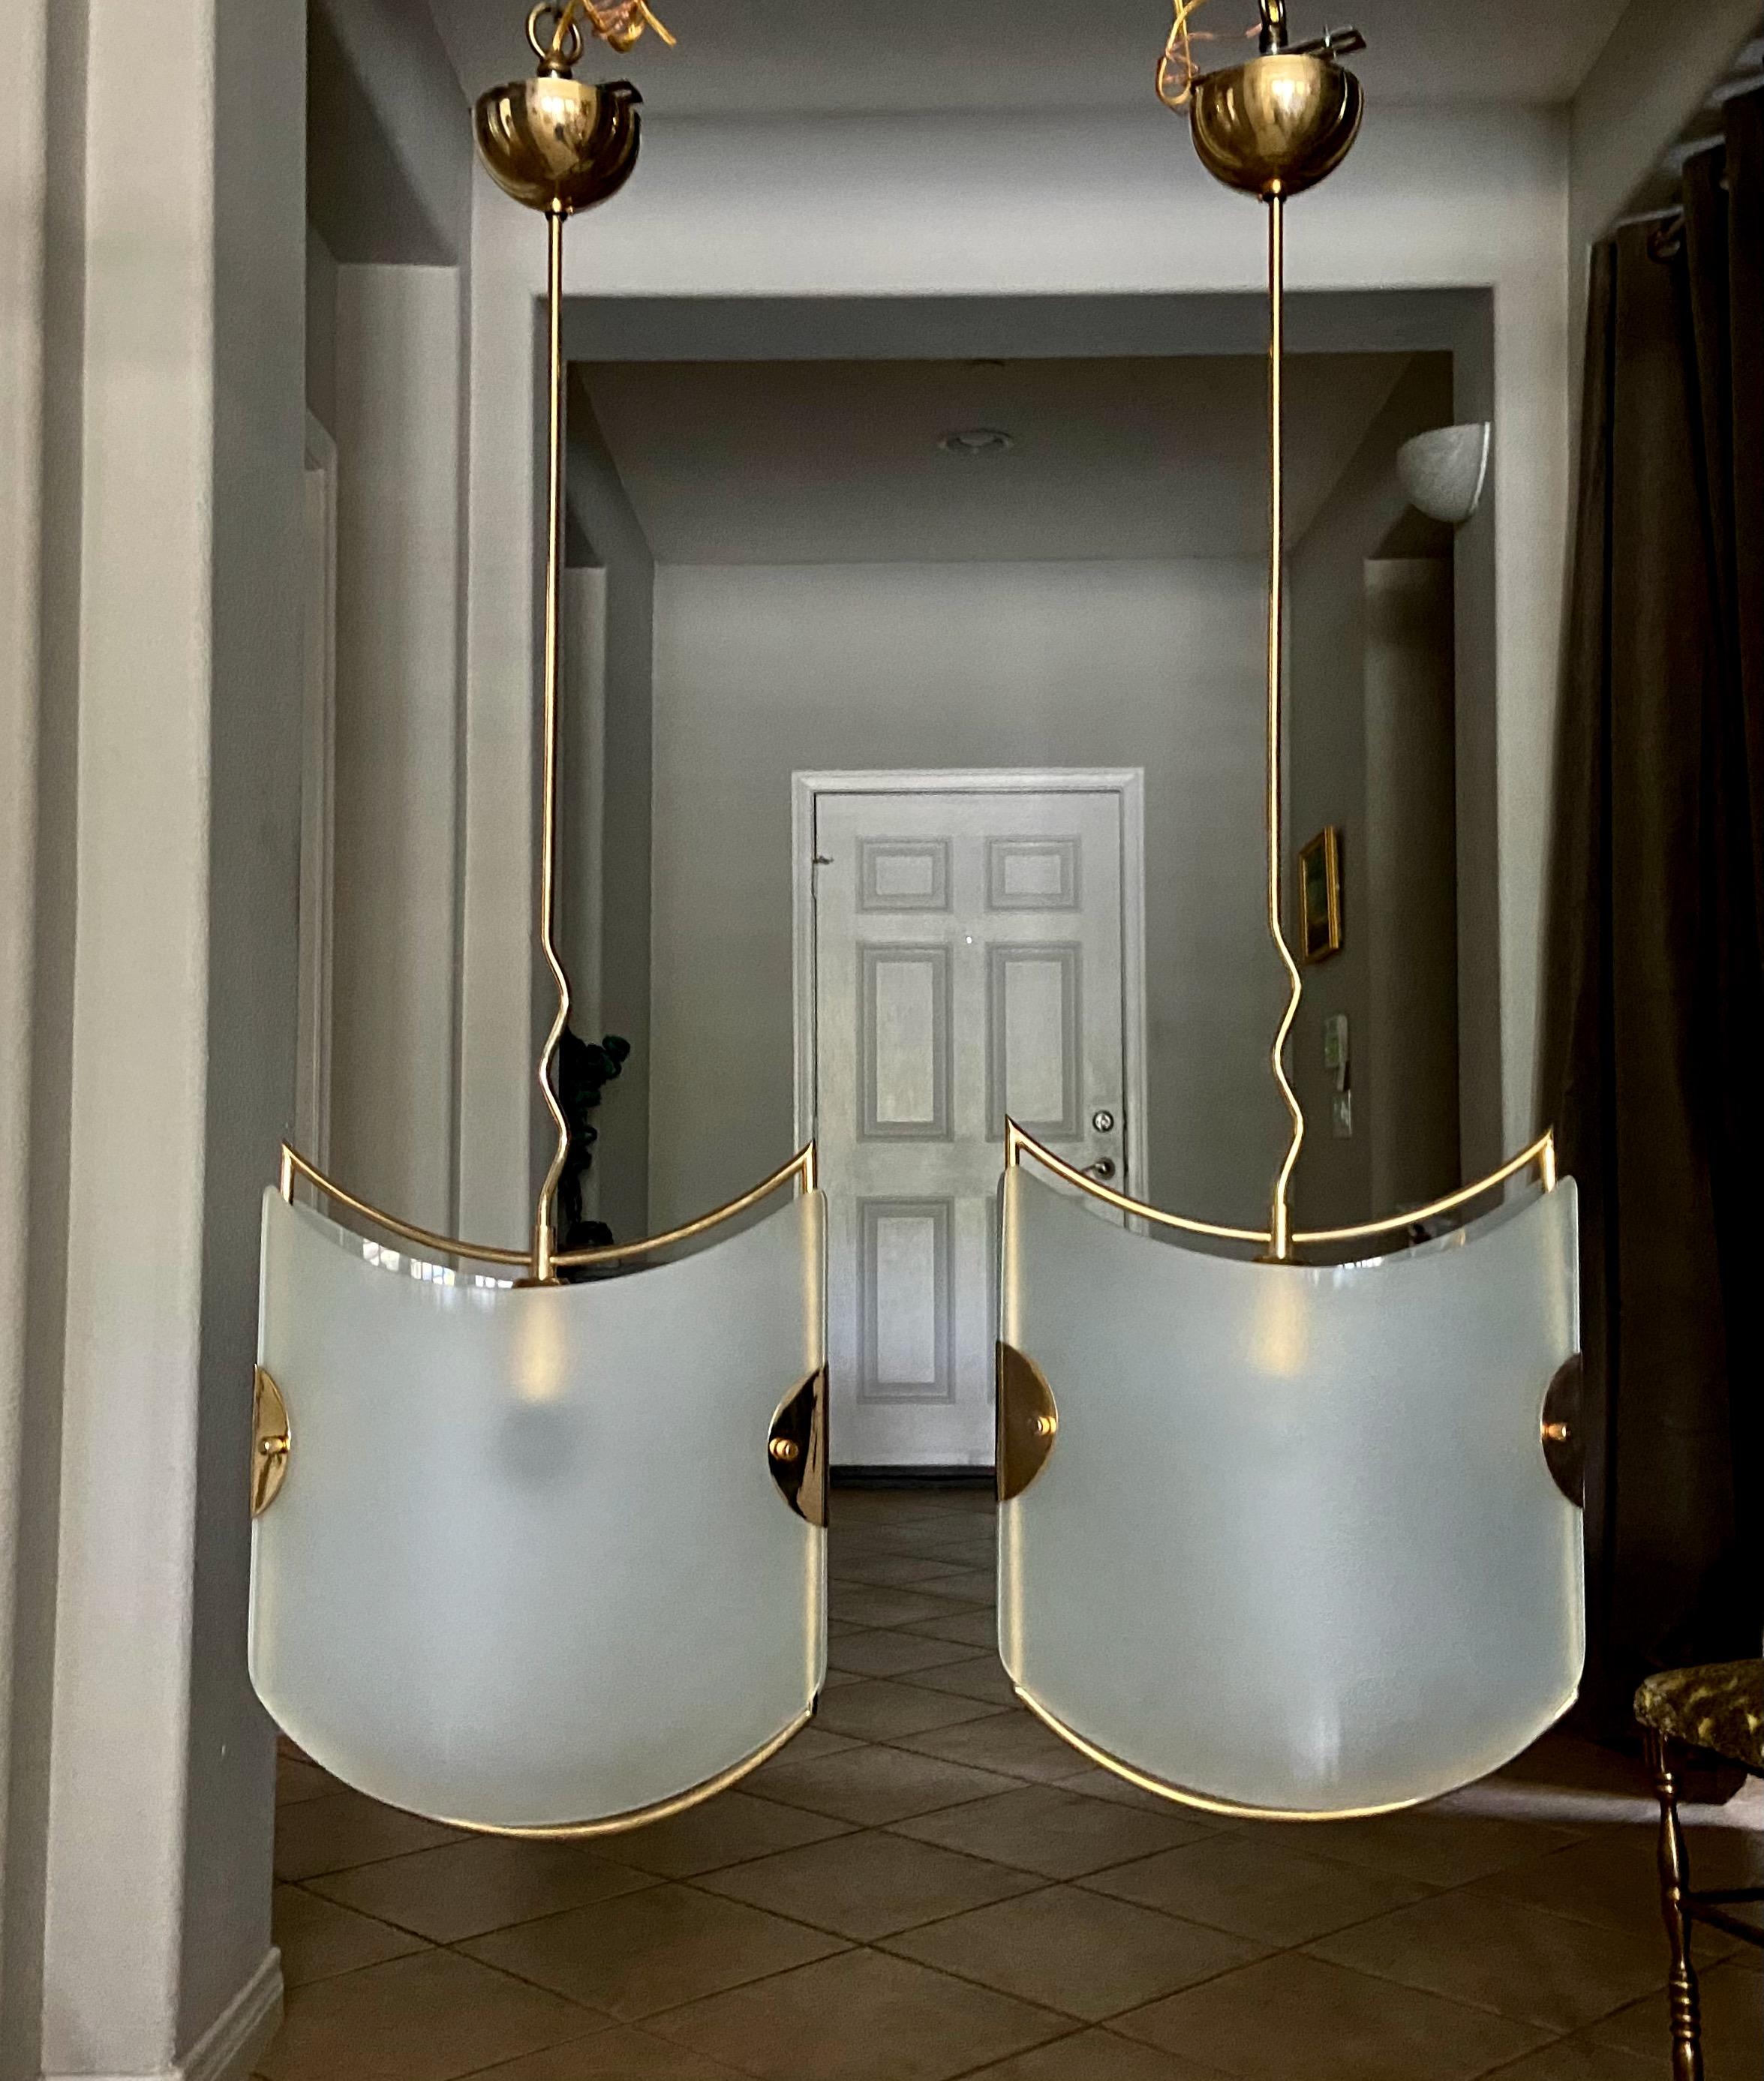 Pair of Italian pendant lights with frosted glass panels and brass finish frames. The modern style is very much in the manner of Gio Ponti for Fontana Arte. In addition to using in an entry or hall, this pair would look perfect over a kitchen or bar